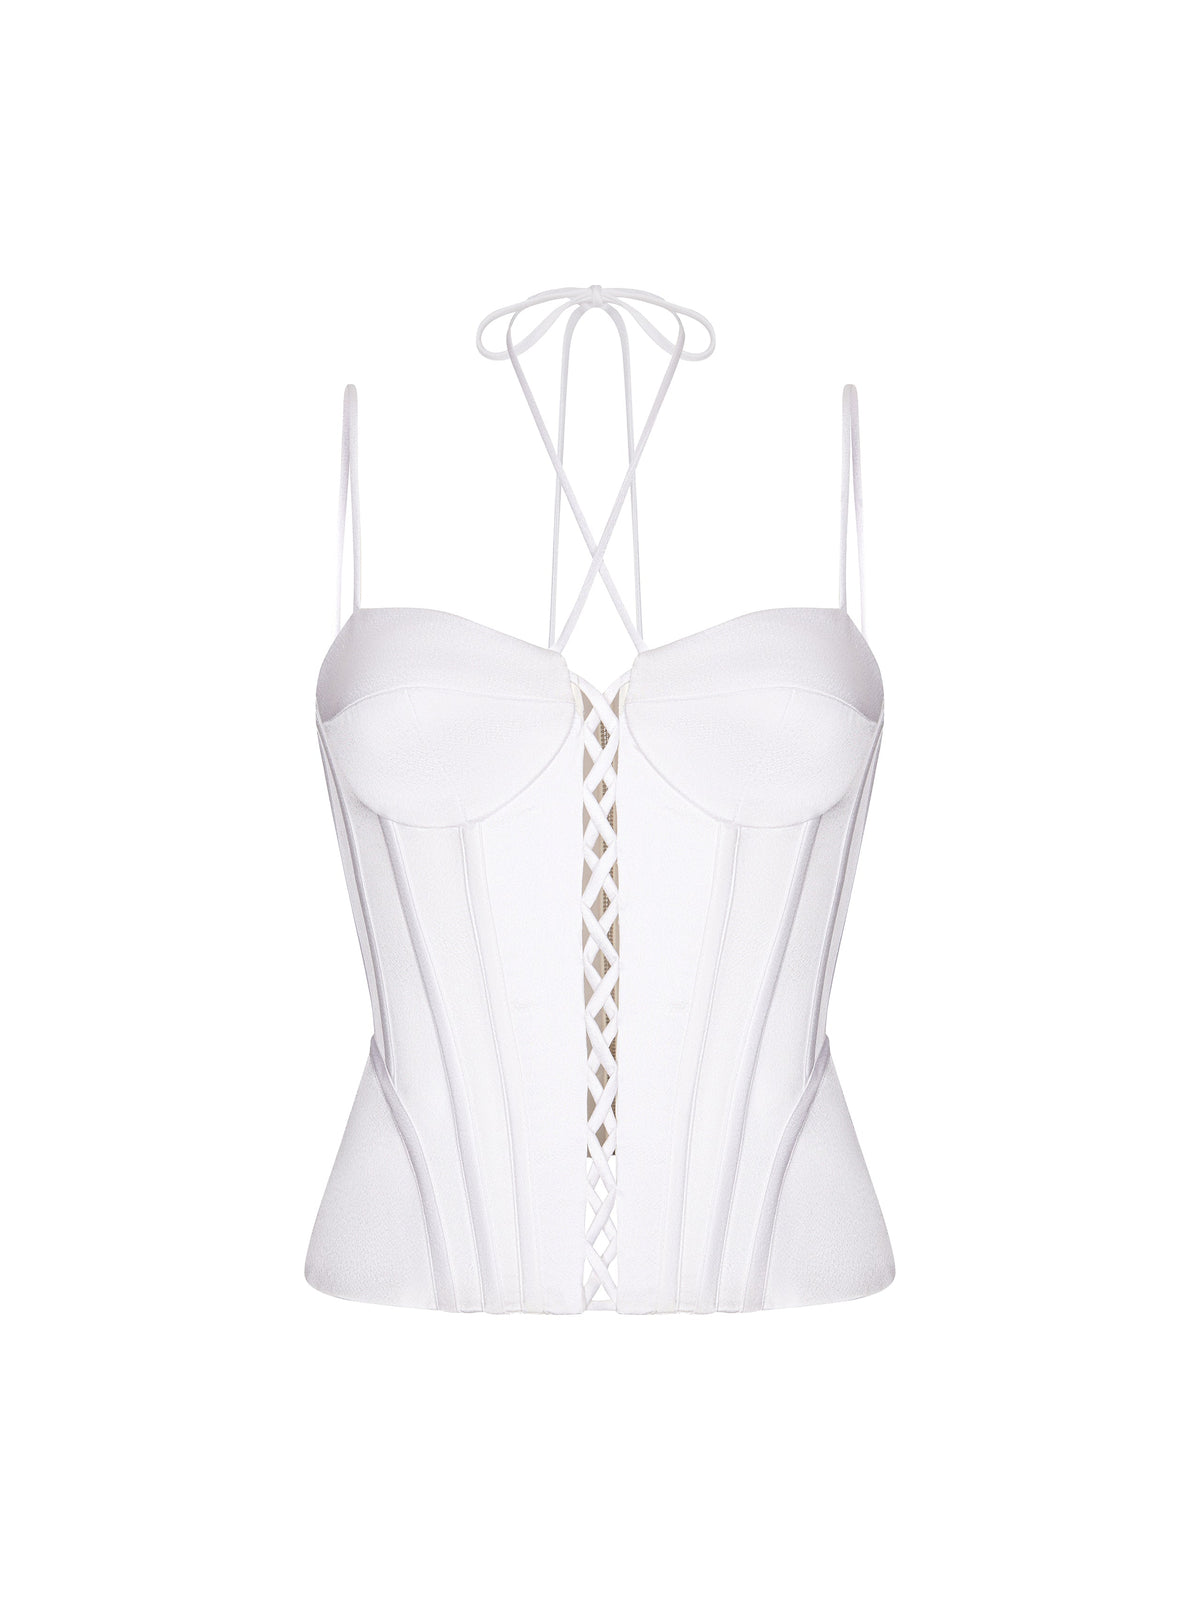 Stradivarius lace-up corset top in white